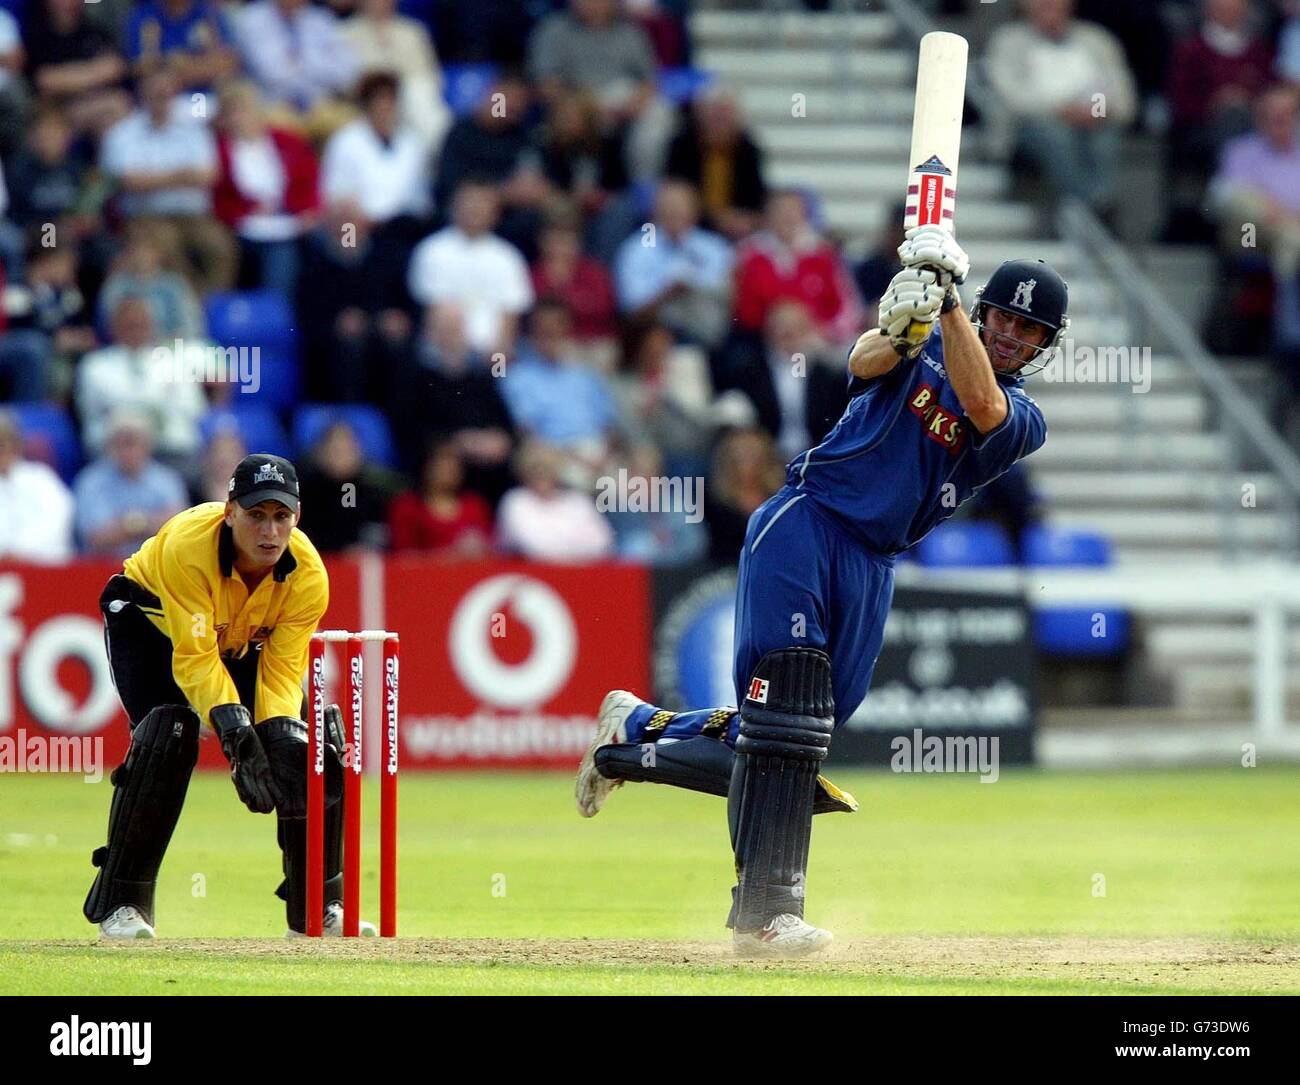 Warwickshire's Brad Hogg flicks a delivery off his pads during his innings of 54 in the Twenty 20 Cup Quarter Final match at Sophia Gardens, Cardiff. Stock Photo